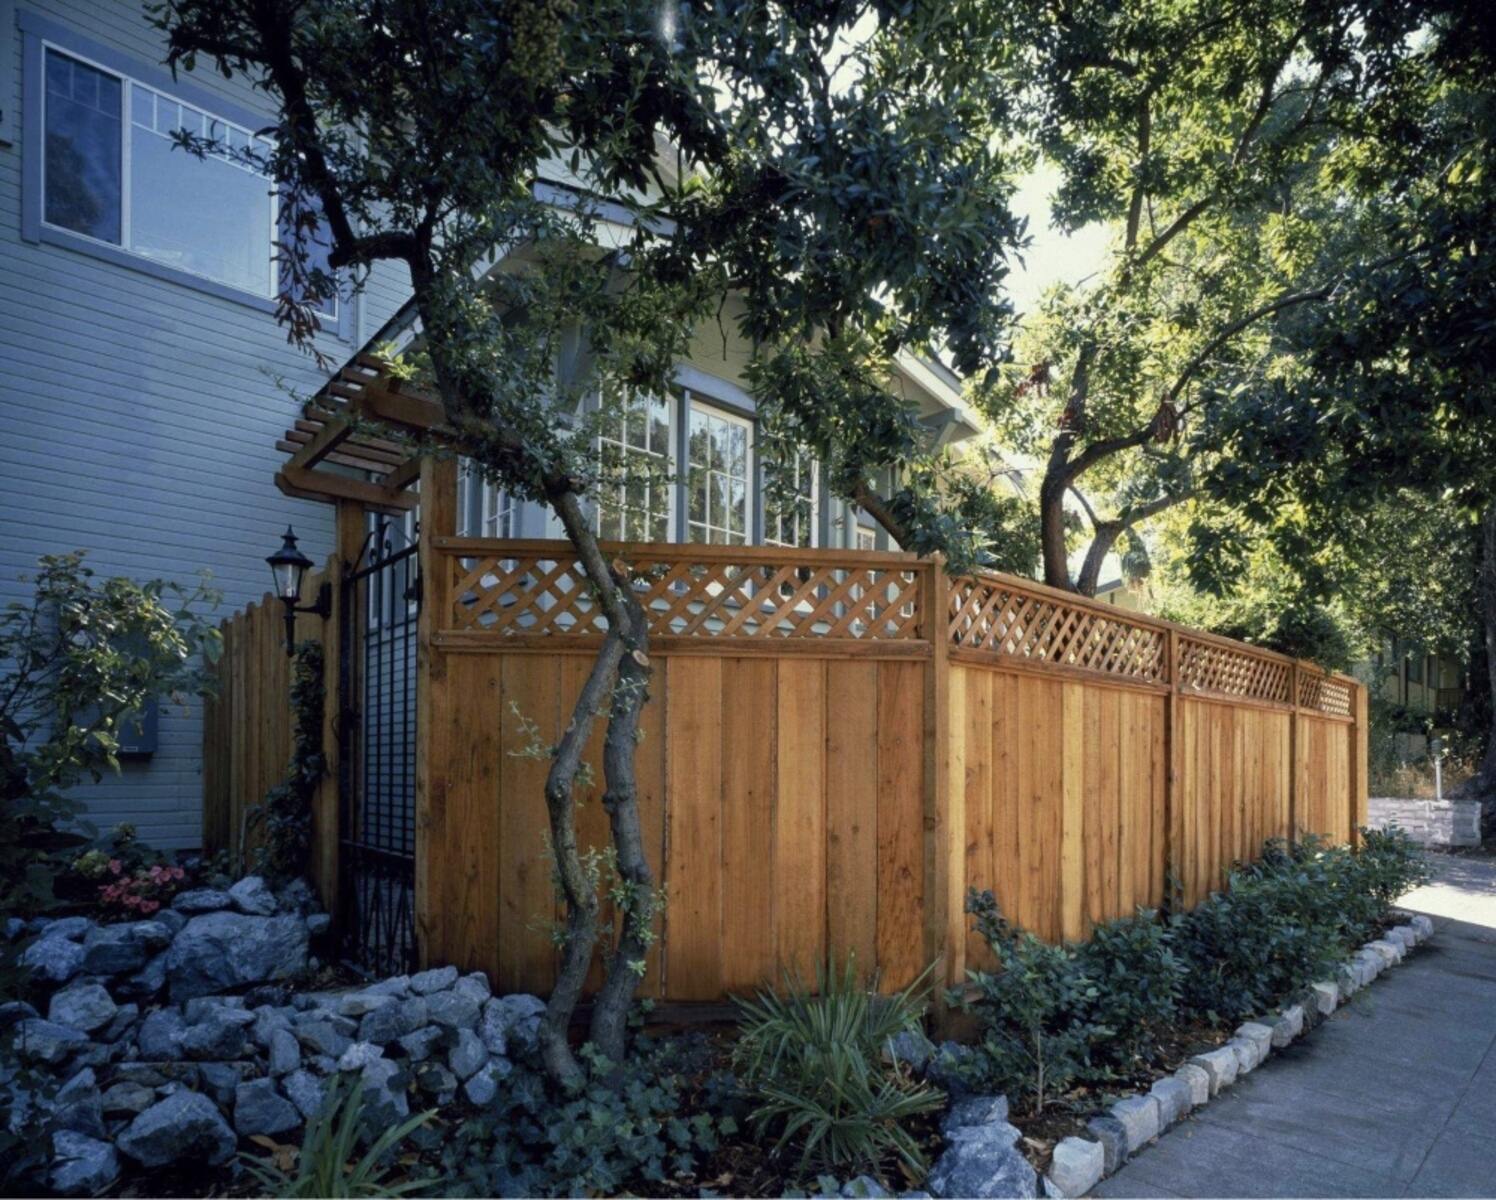 Fencing In Privacy: Attaching A Privacy Screen To Your Fence